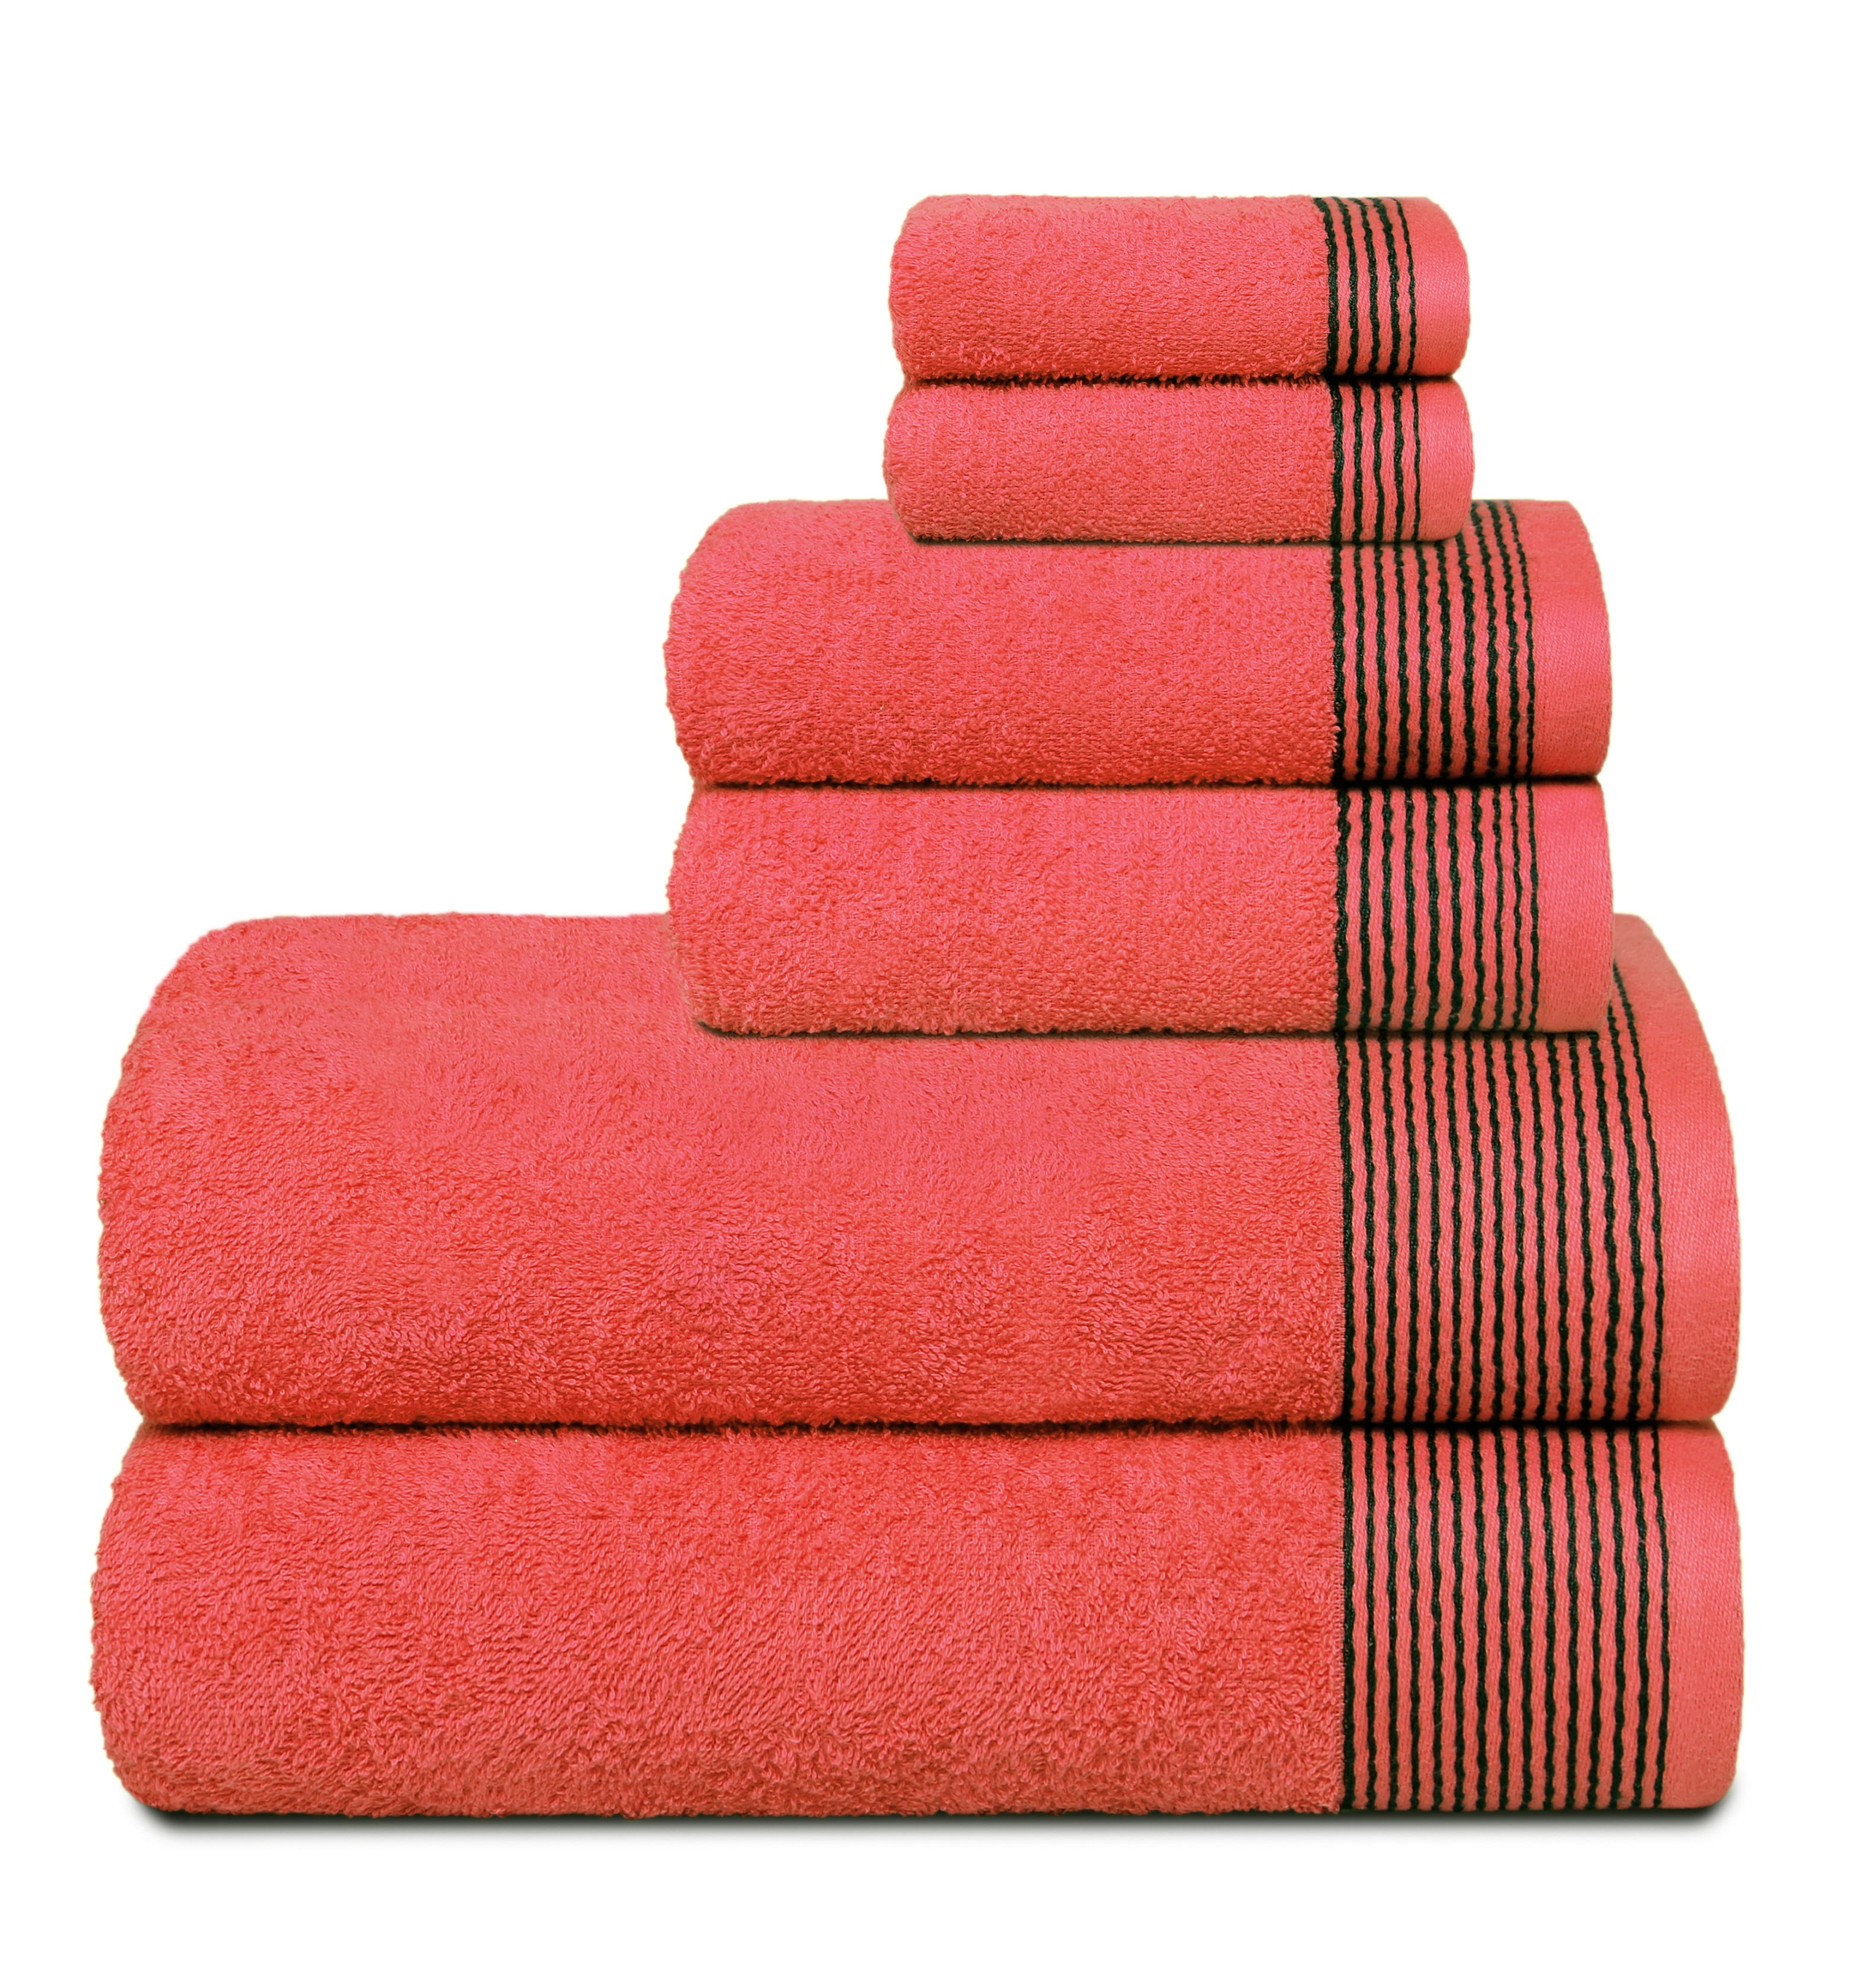 GLAMBURG Ultra Soft 6 Pack Cotton Towel Set, Contain 2 Bath Towels 28x55  inches, 2 Hand Towels 16x24 inches & 2 Wash Coths 12x12 inches, Compact  Lightweight Quickdry Towel Set for Everyday